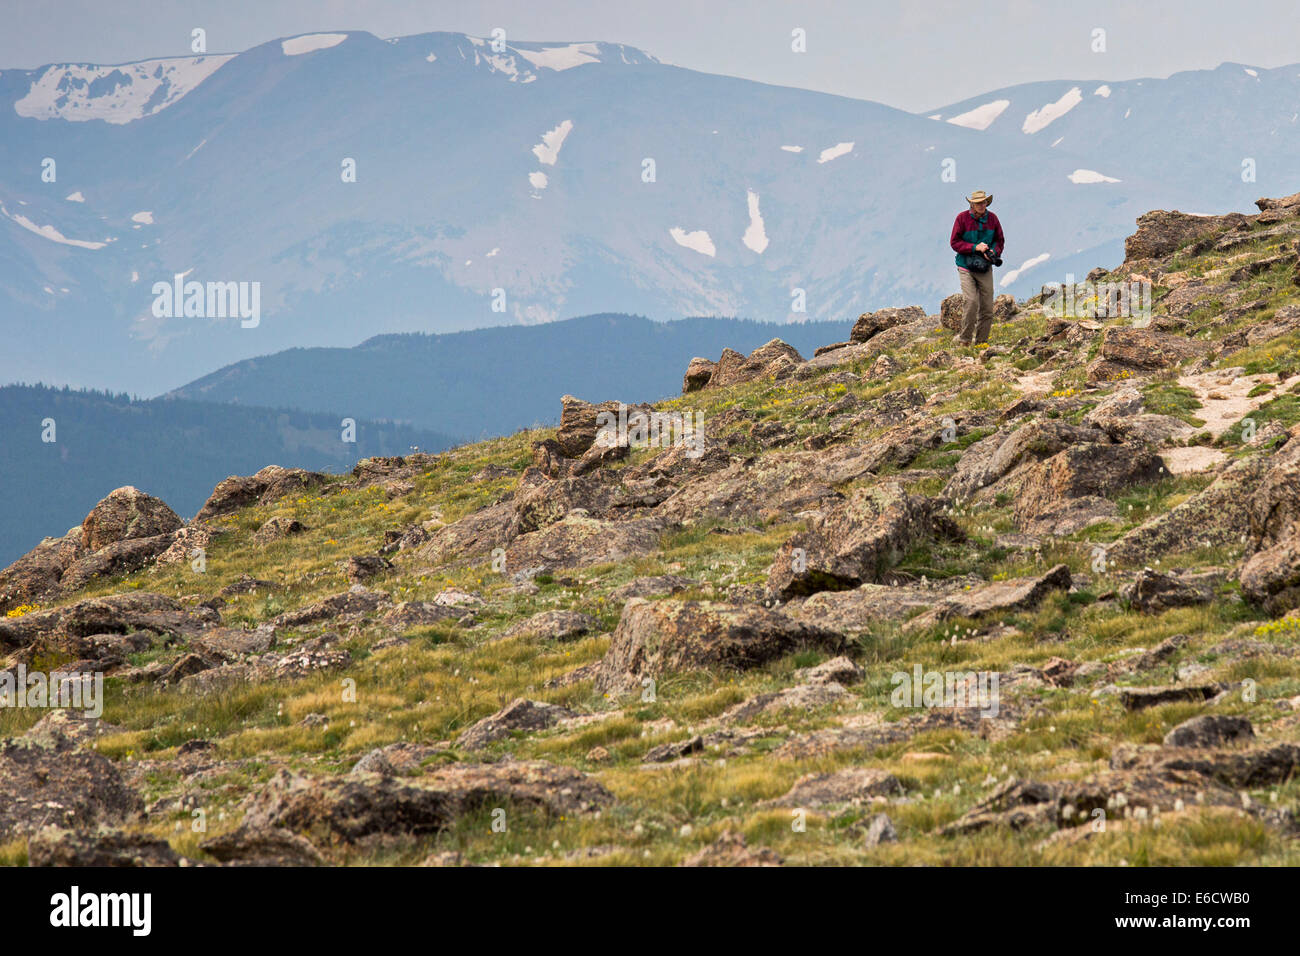 Idaho Springs, Colorado - A photographer hikes on the tundra near the summit of Mt. Evans, one of the most accessible high peaks Stock Photo